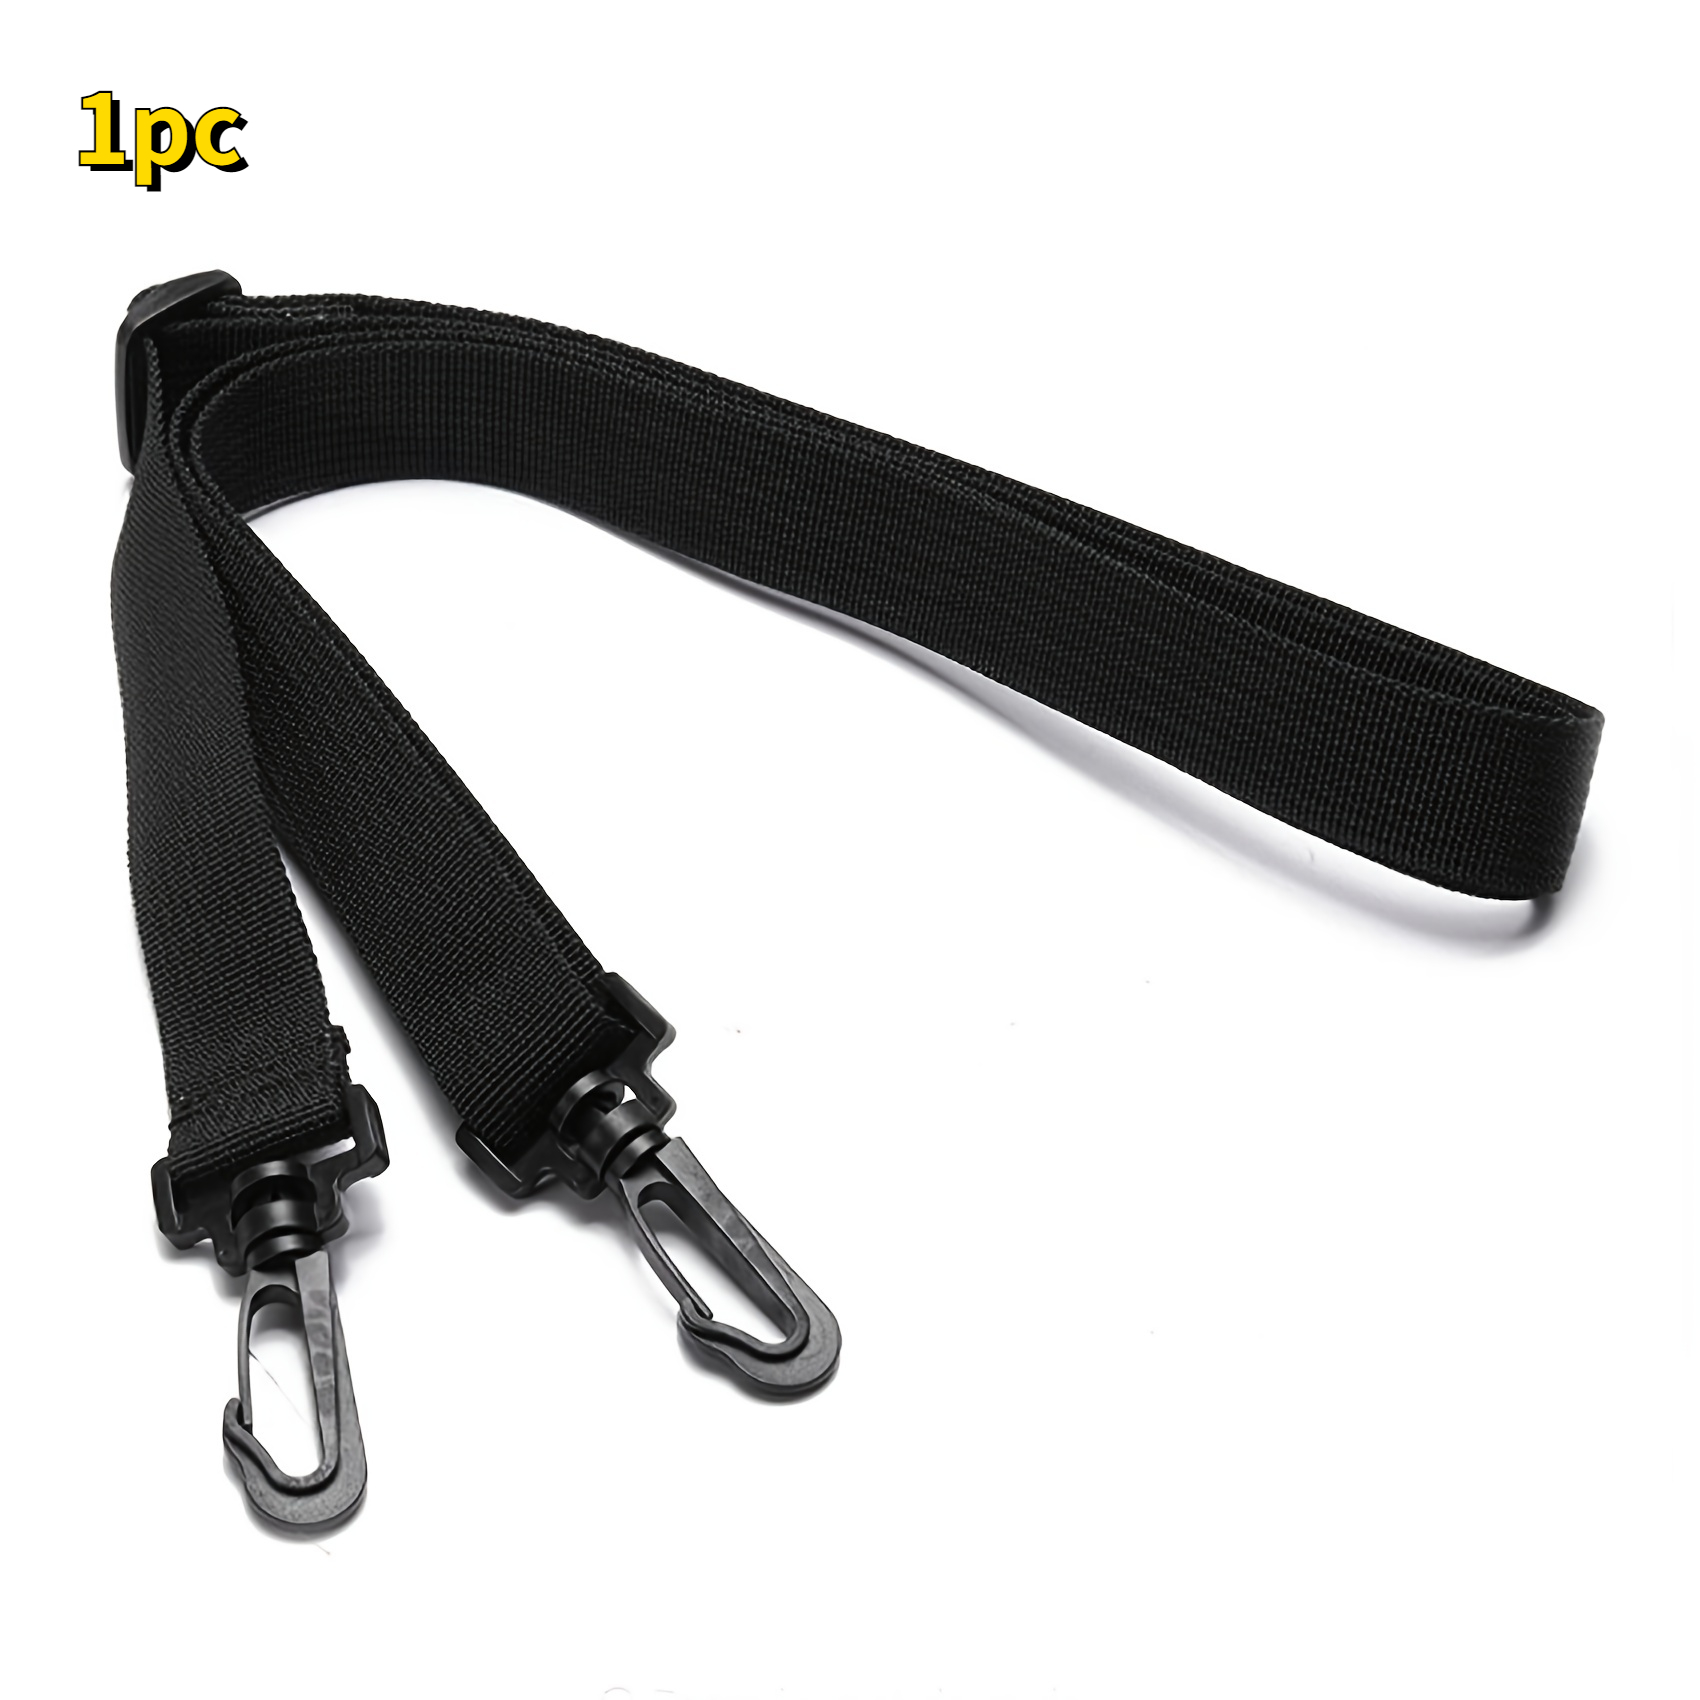 Purse Strap Universal Adjustable with No Punching Buckle Bag Shoulder Strap  Cross Body Strap for Small Bag Briefcase Purse DIY Modification Black 